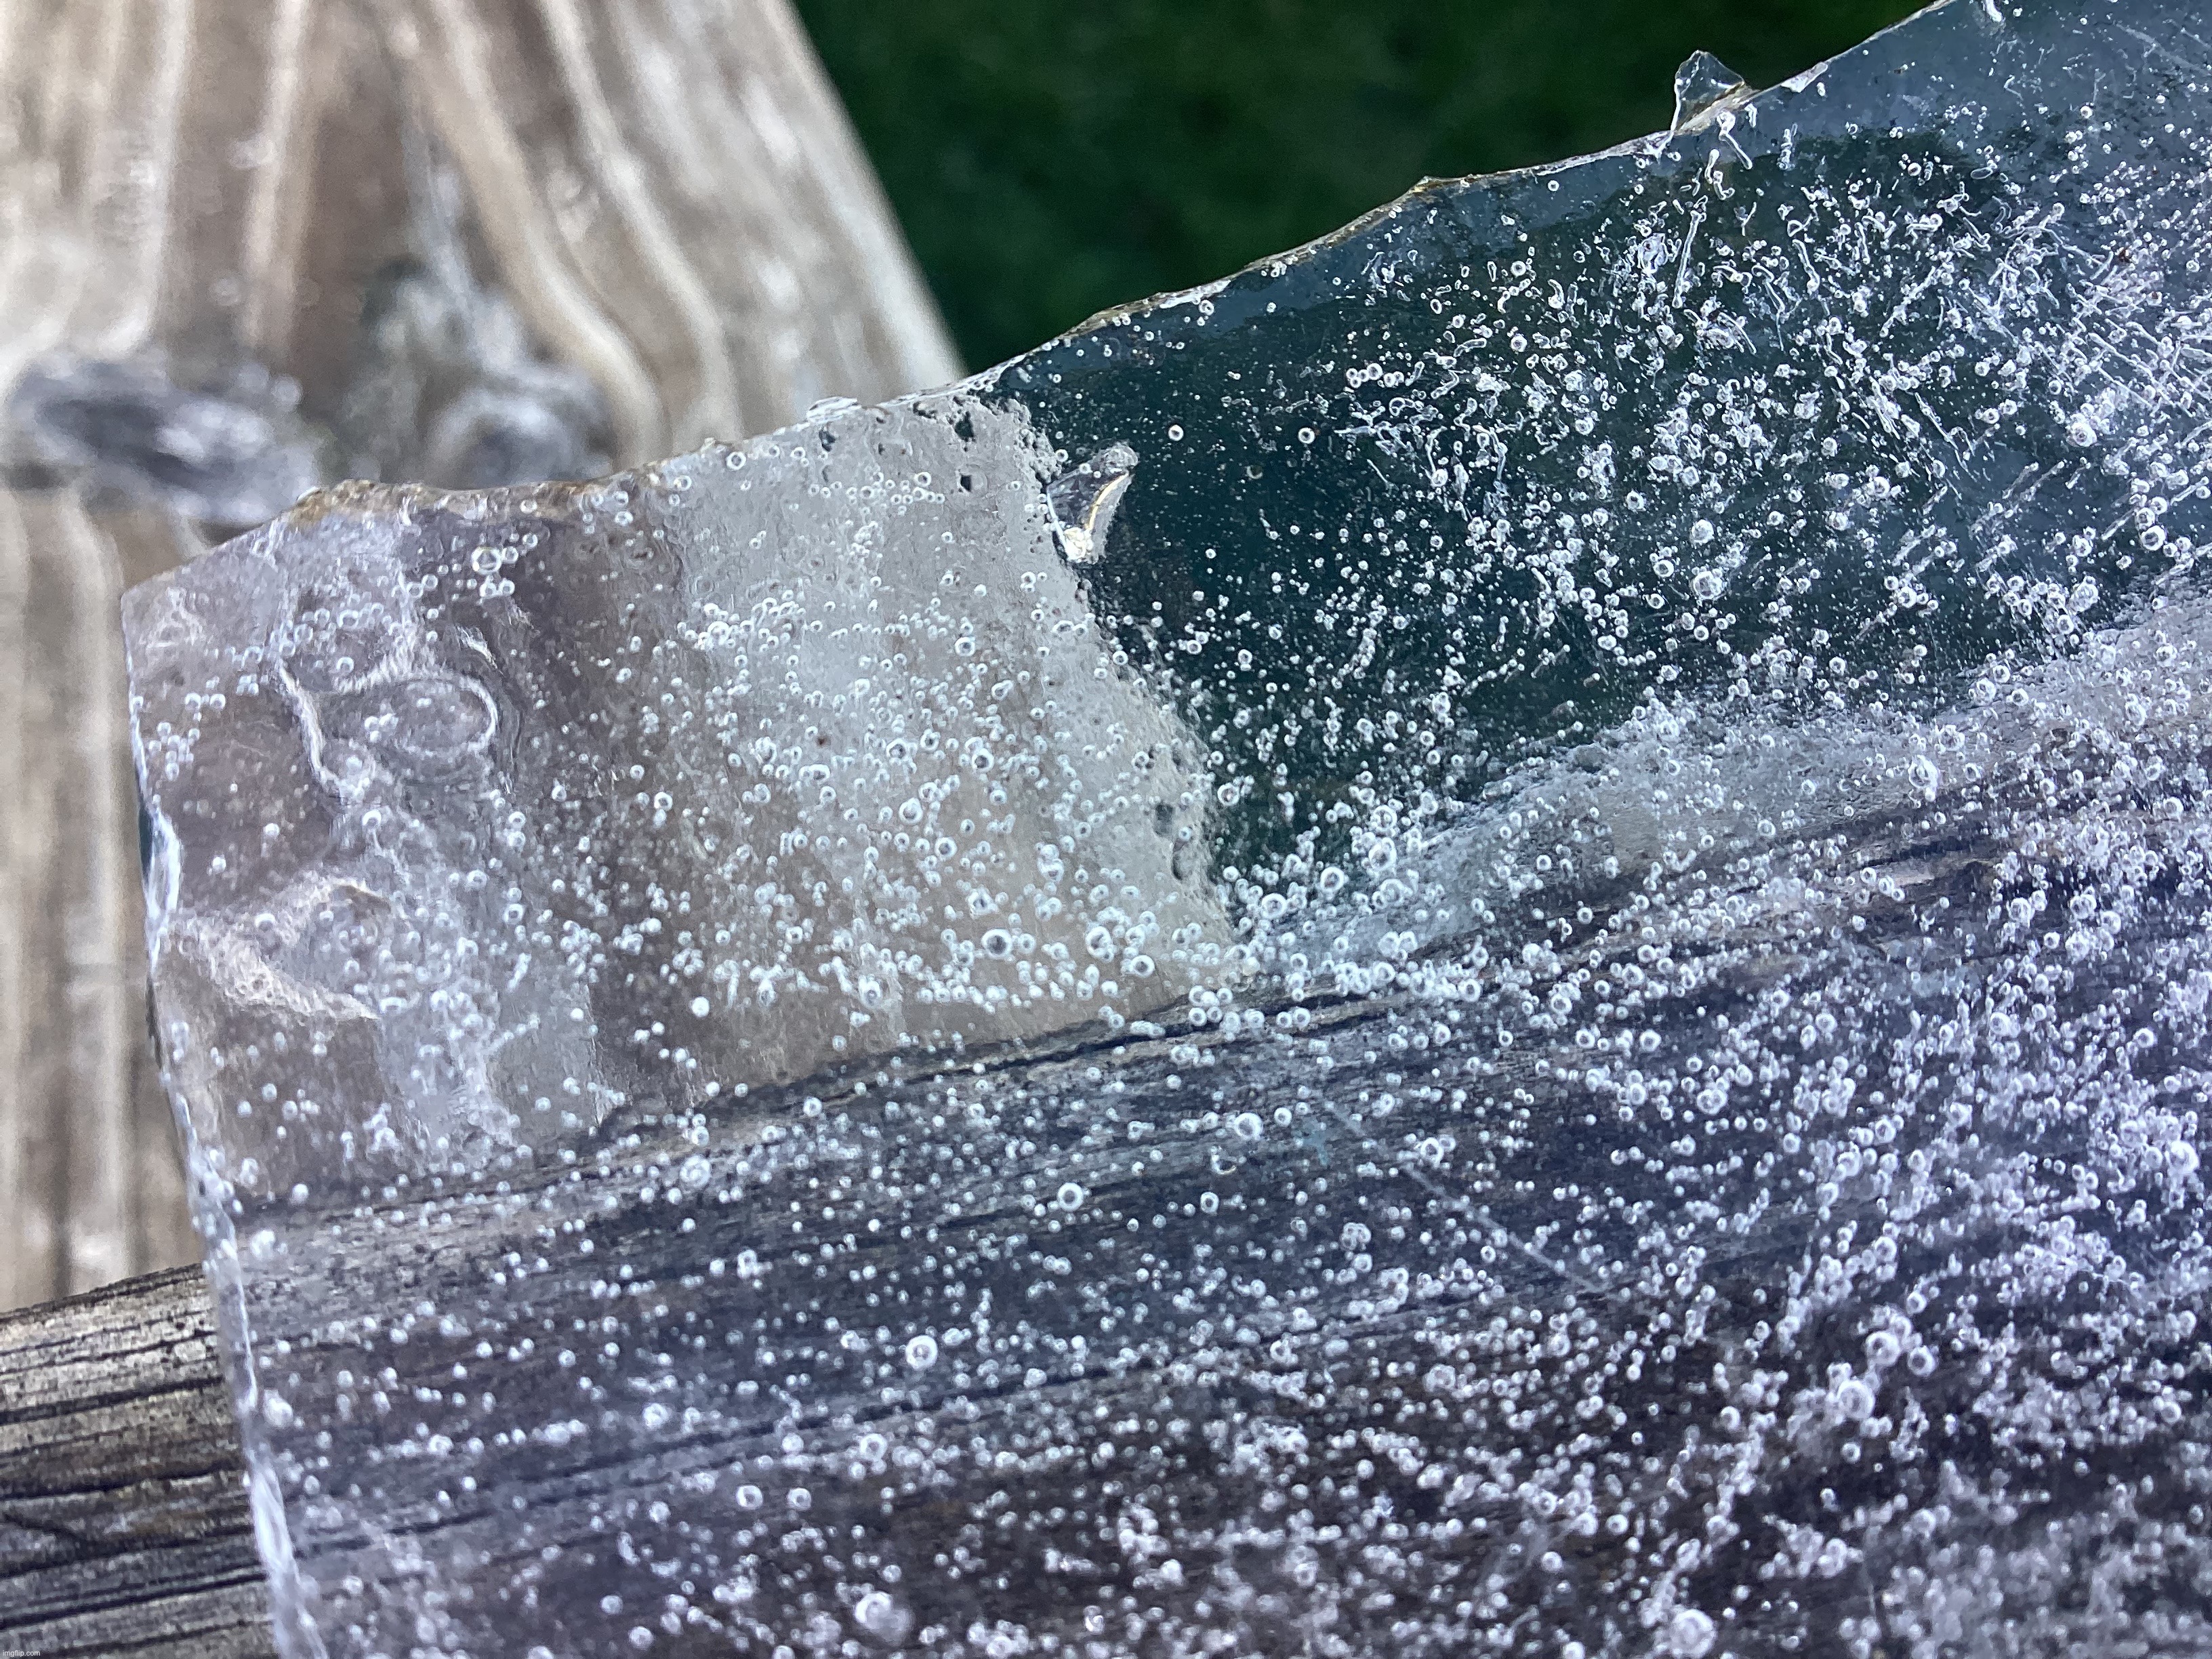 Some very detailed ice that I found, look at all the bubbles | image tagged in share your own photos | made w/ Imgflip meme maker